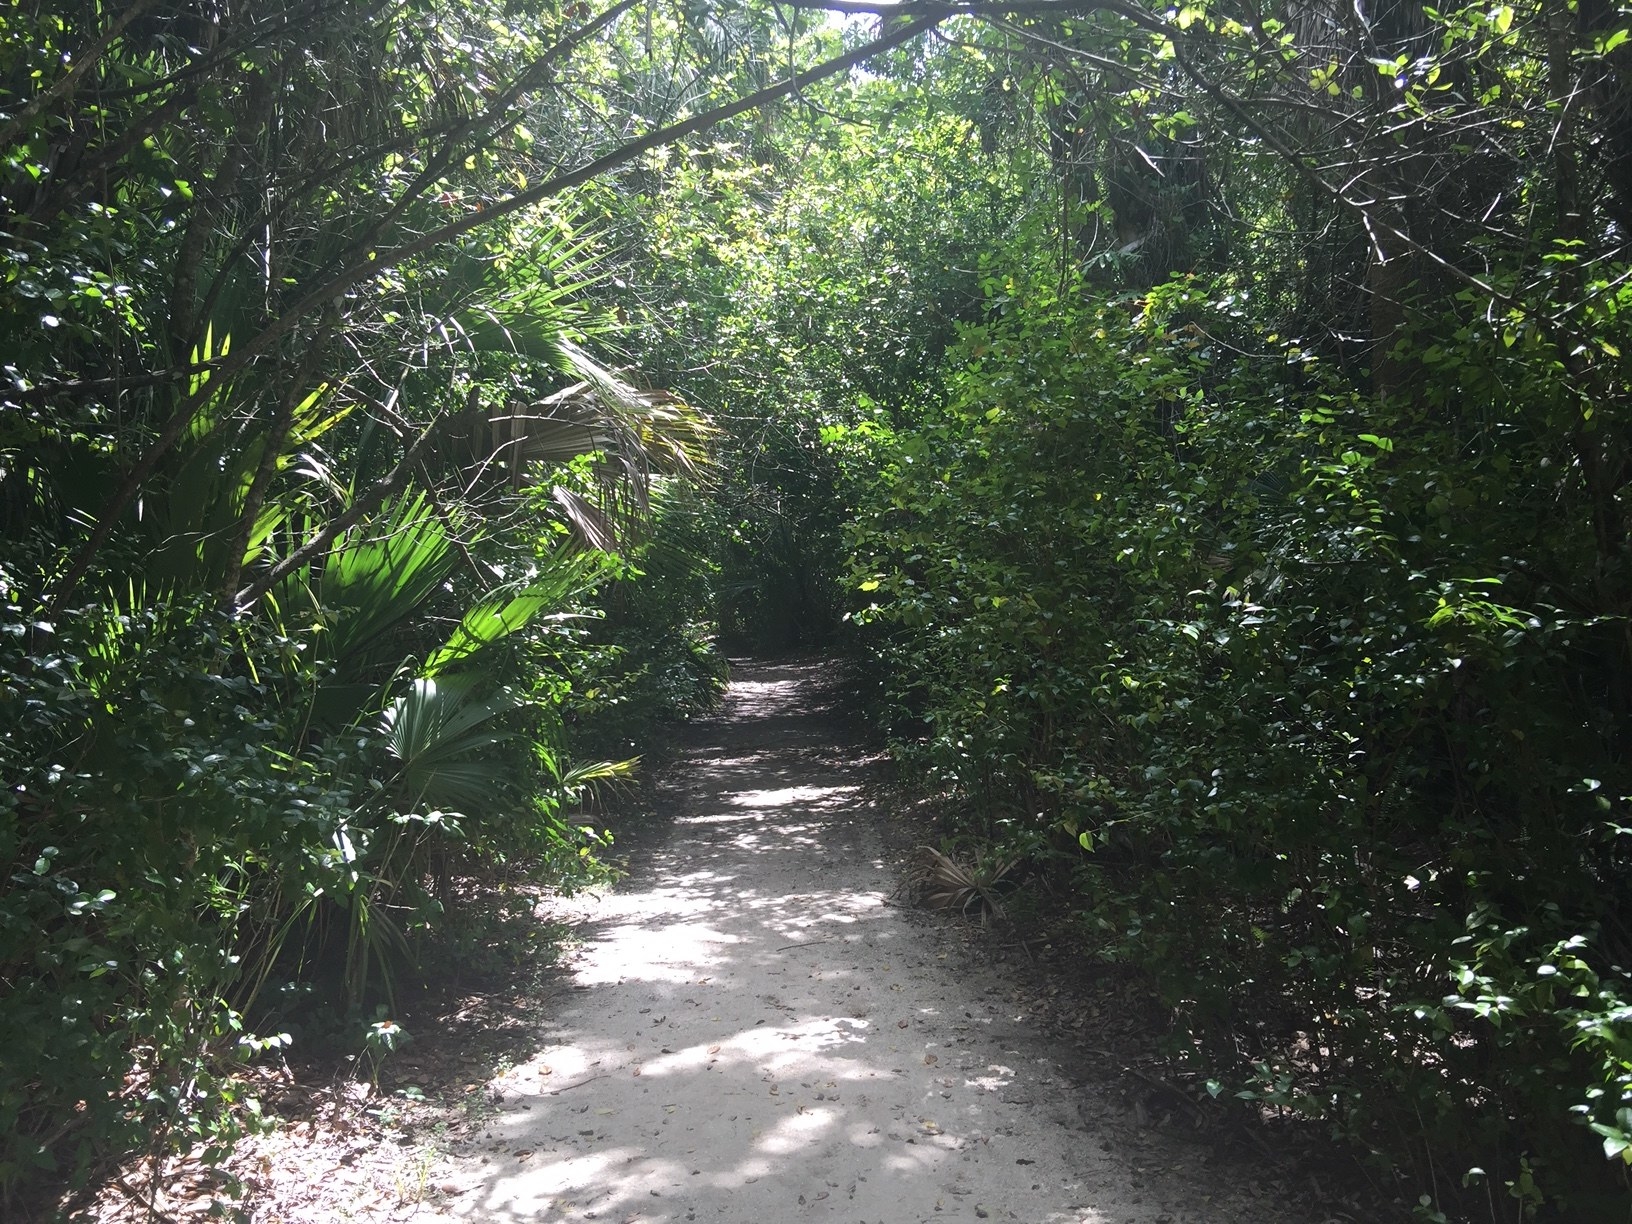 A shadowed trail path with dense trees all around it like a tunnel